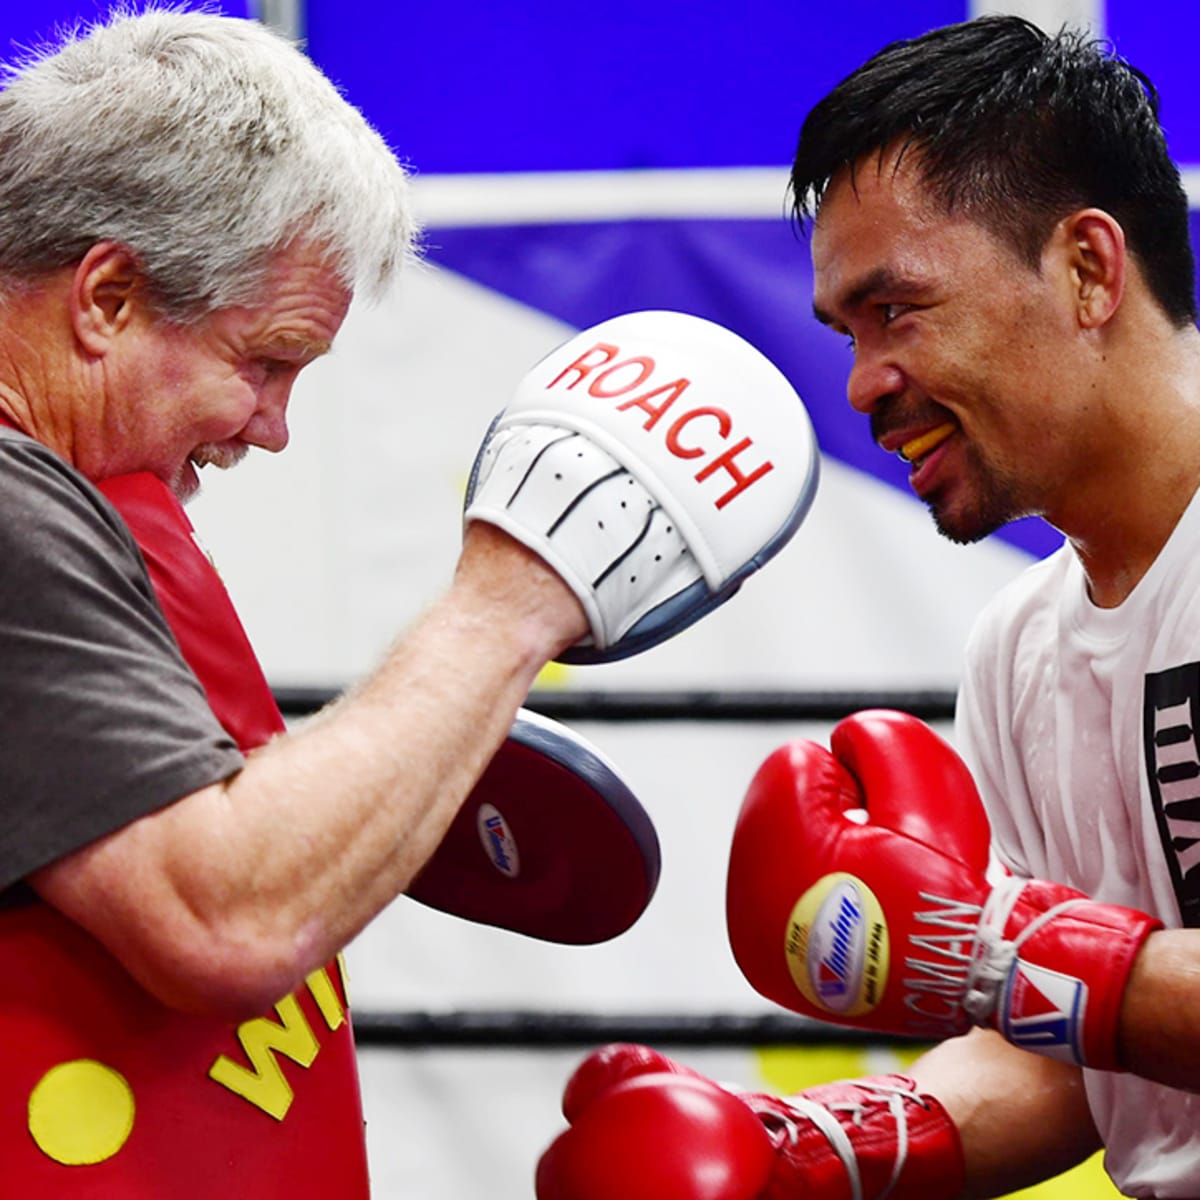 Manny Pacquiao reinvents himself ahead of Keith Thurman